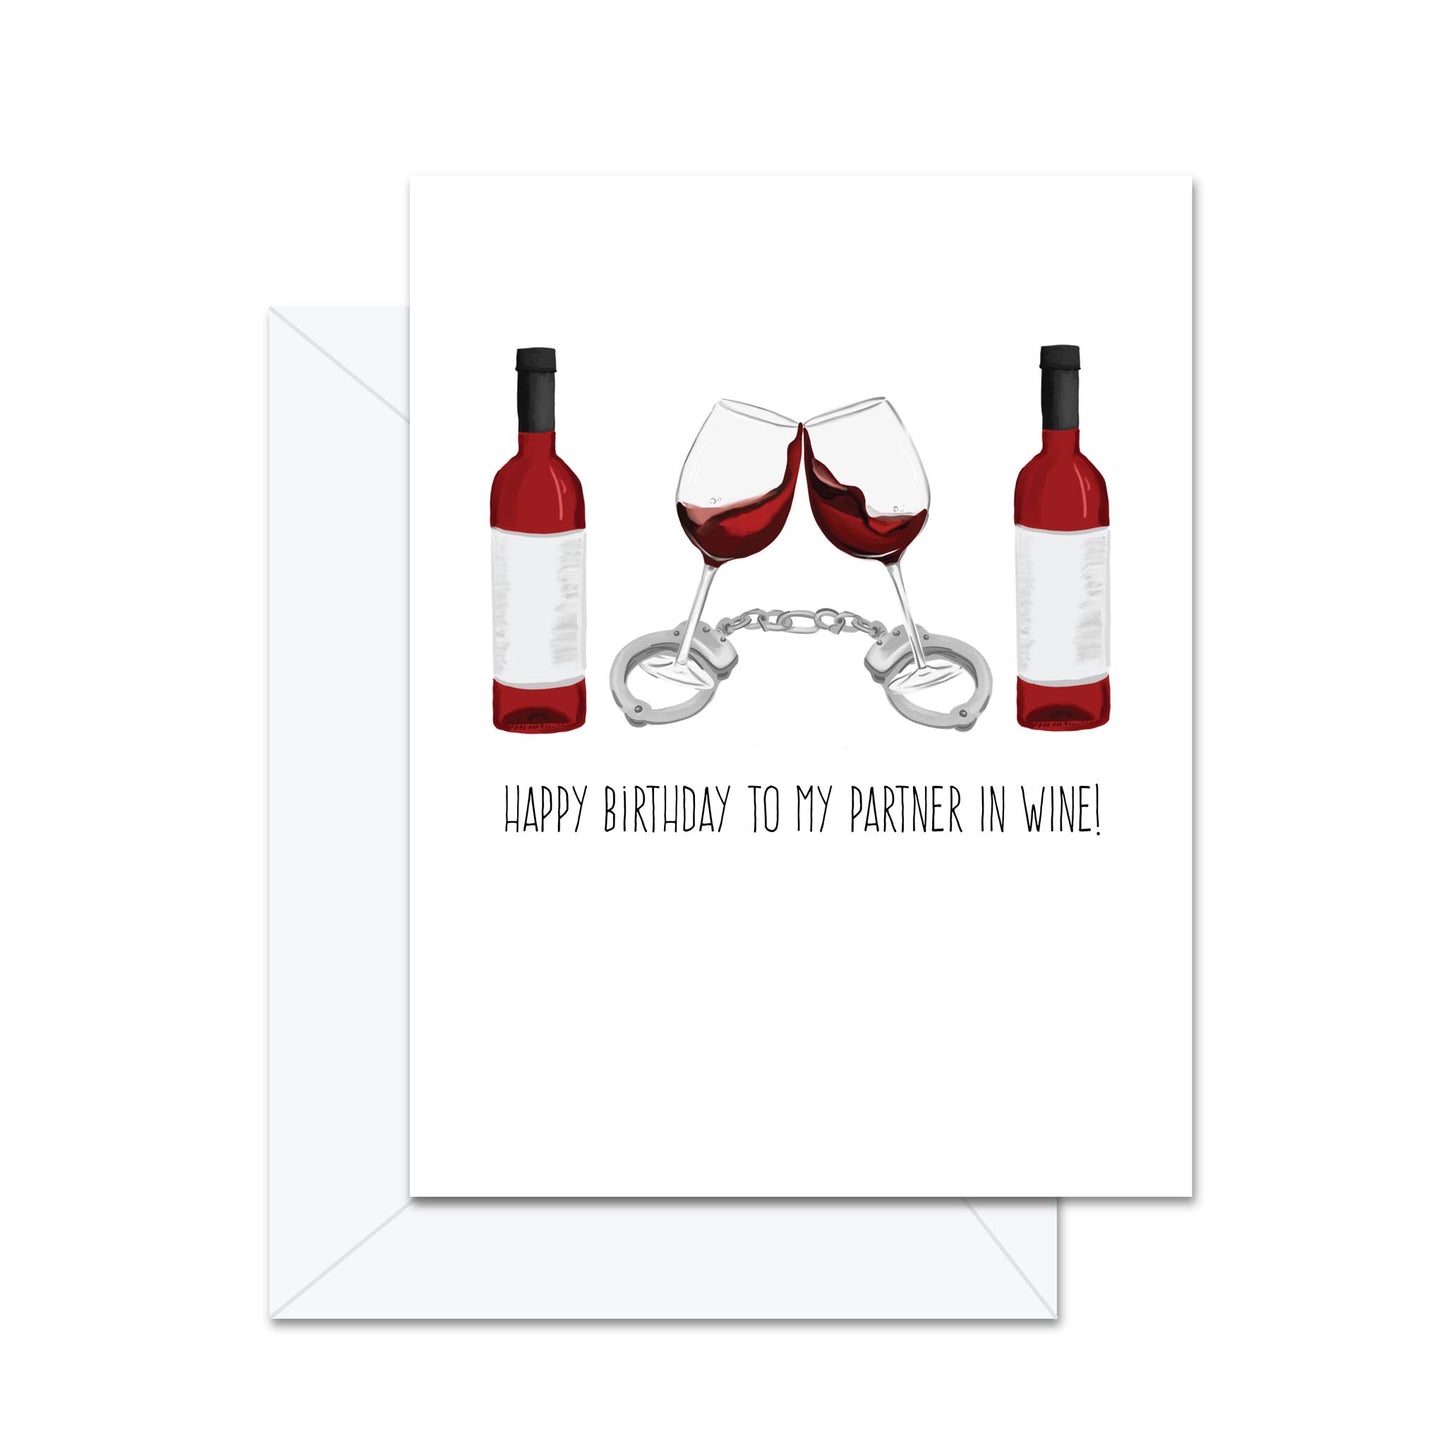 Happy Birthday To My Partner In Wine! - Greeting Card